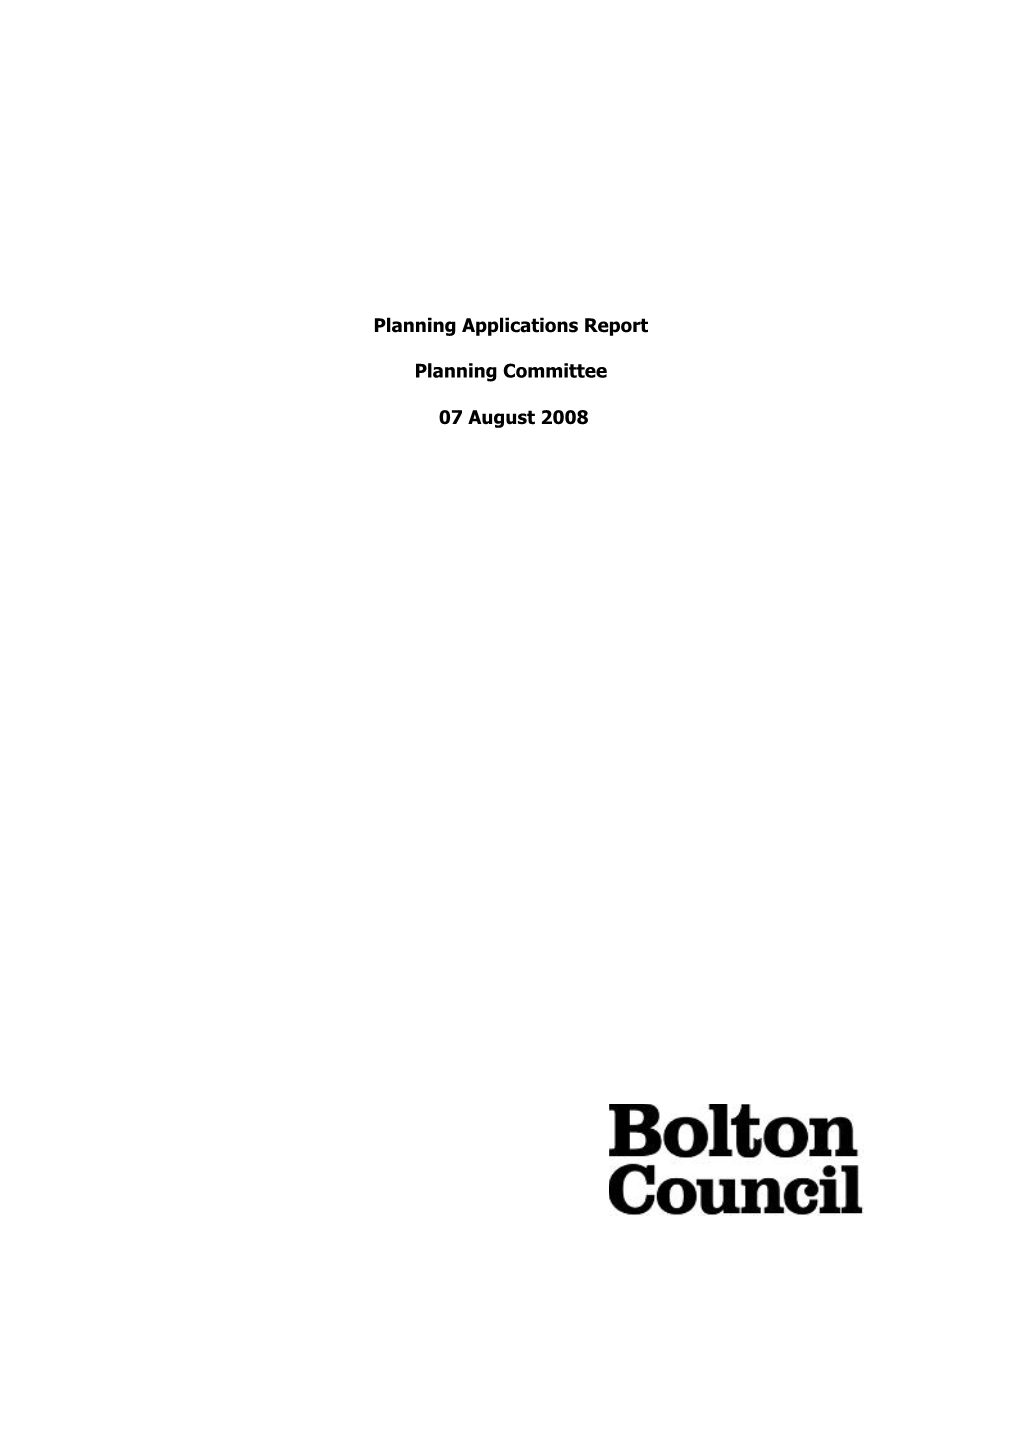 Planning Applications Report Planning Committee 07 August 2008